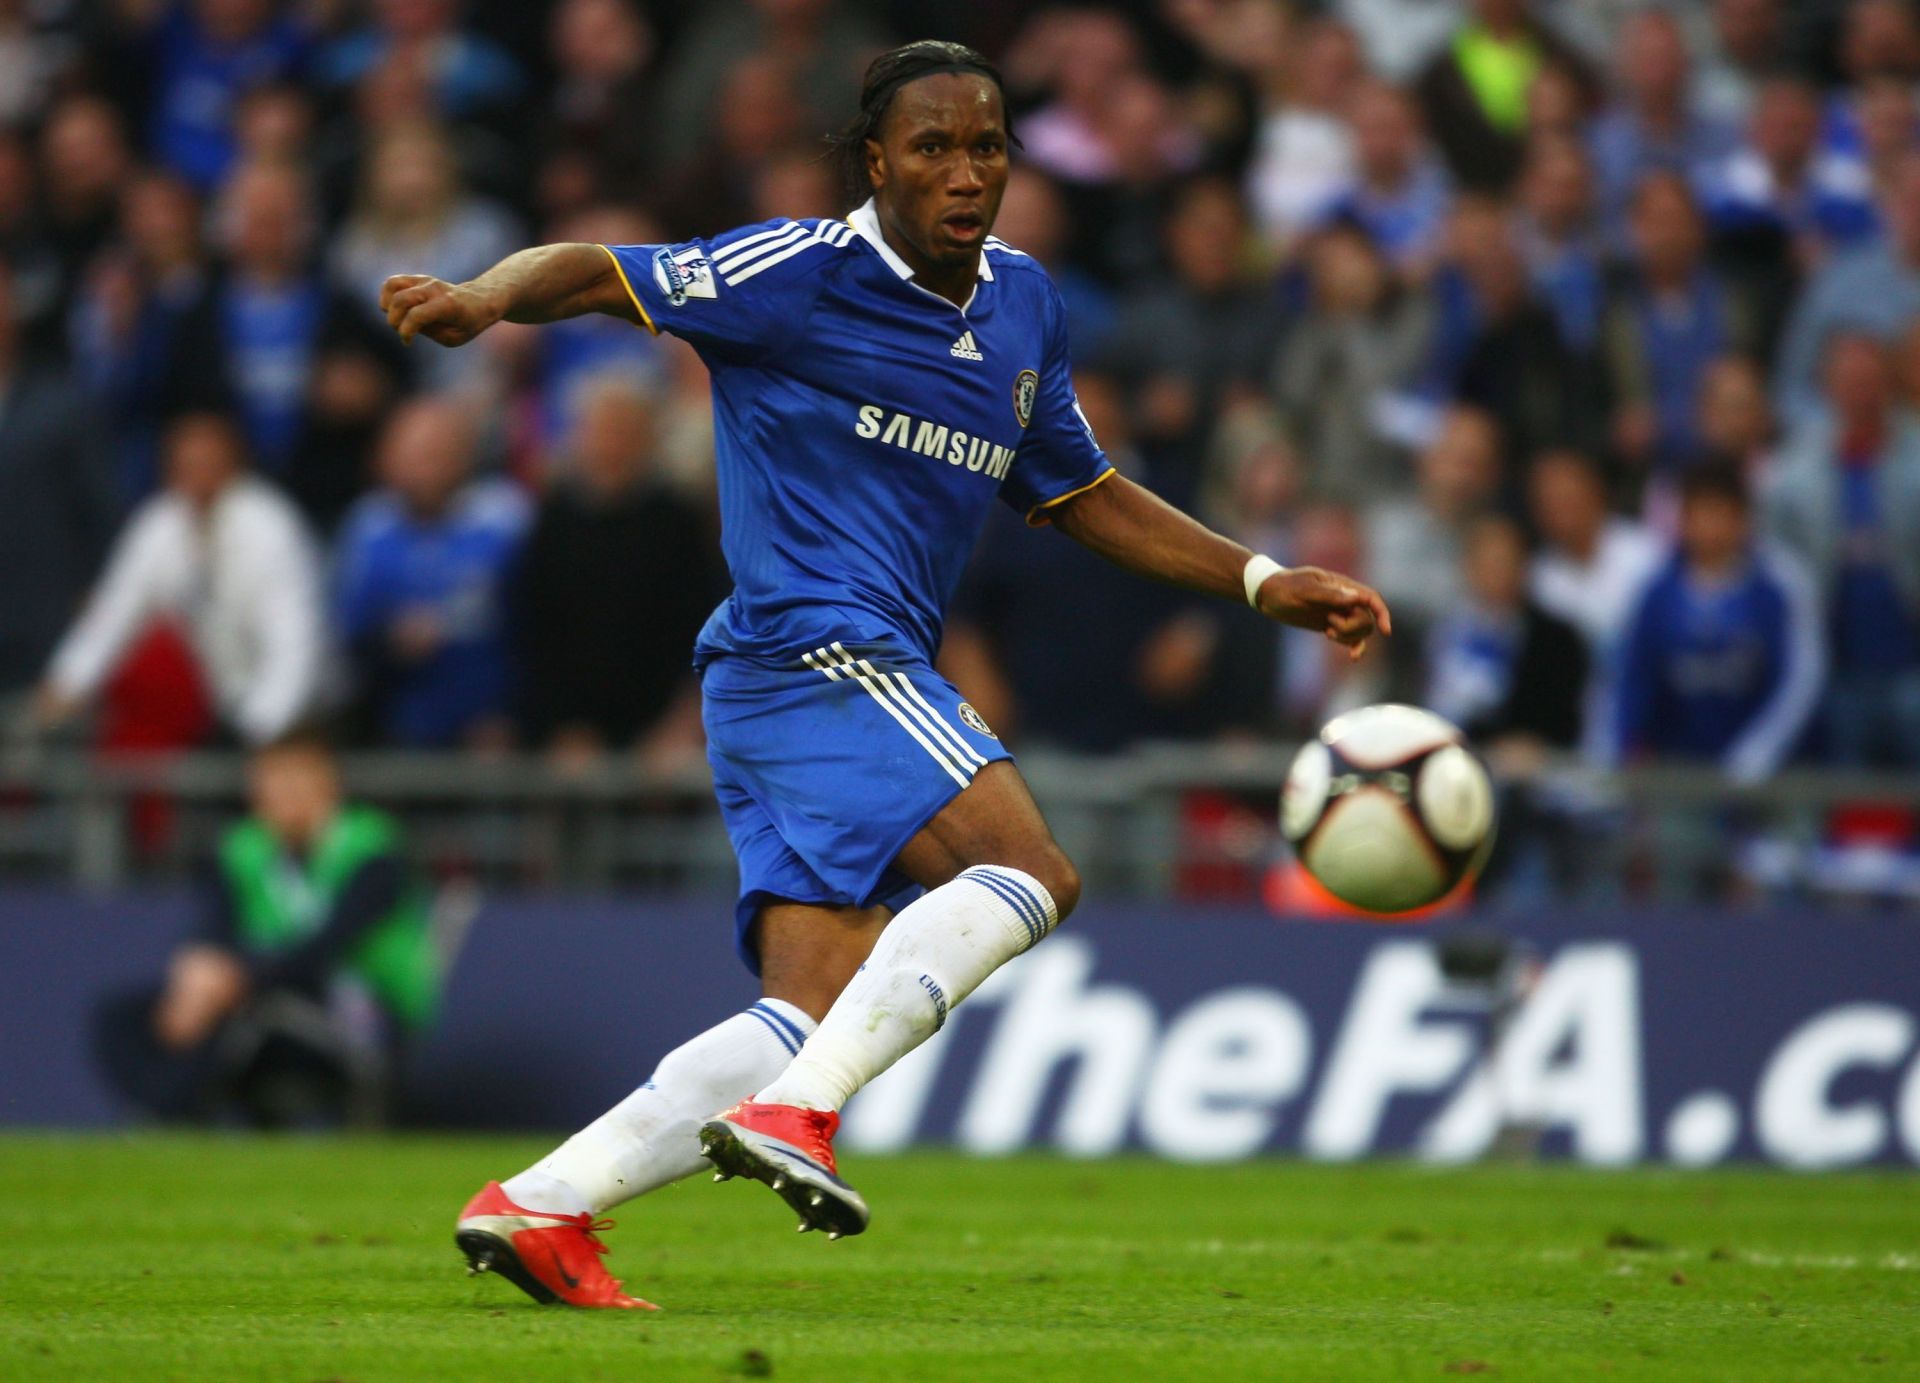 Didier Drogba loved playing against the Gunners.